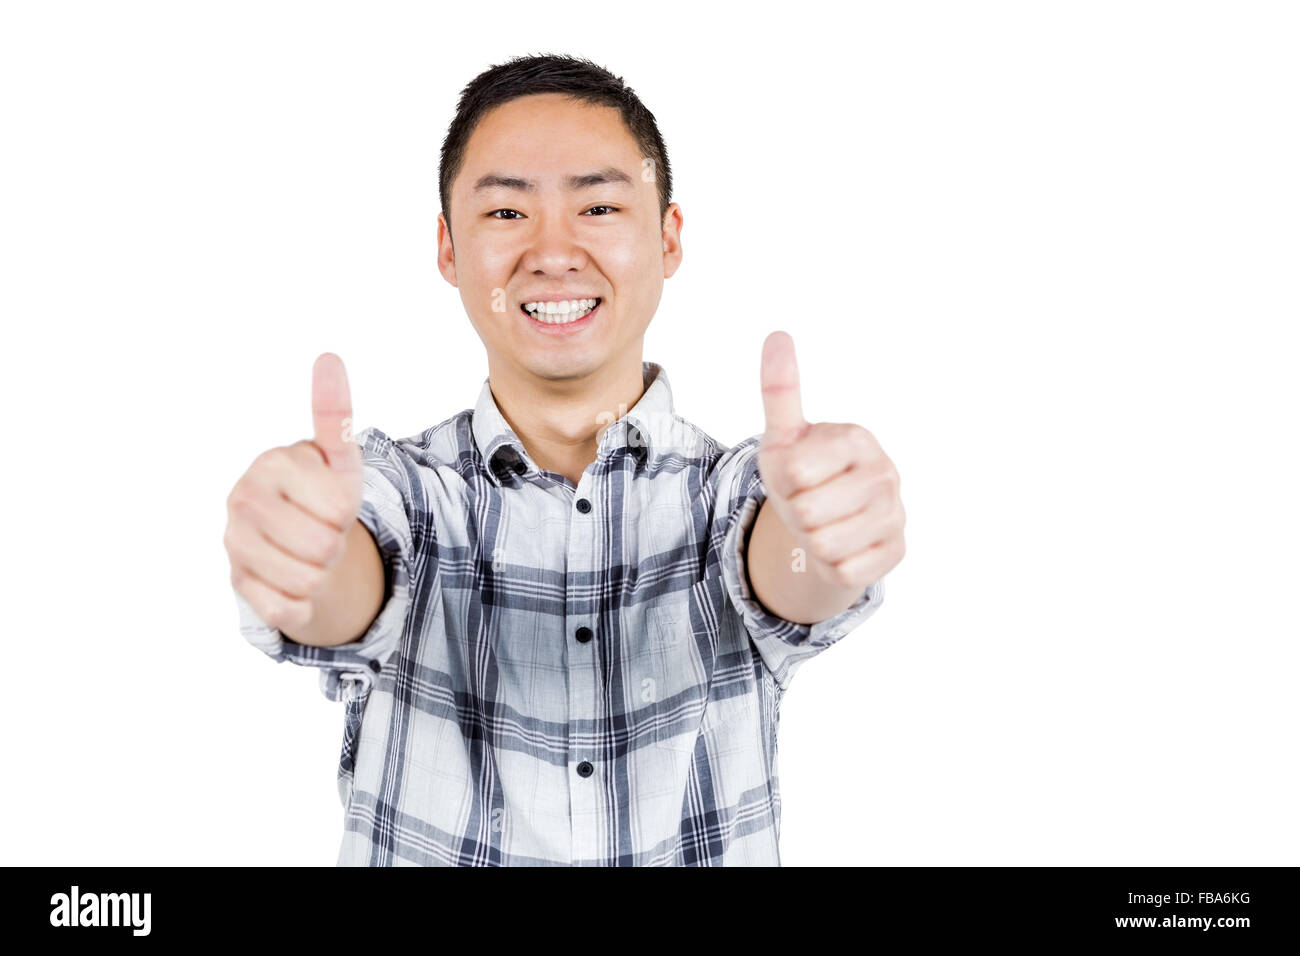 Happy man showing thumps up a Stock Photo